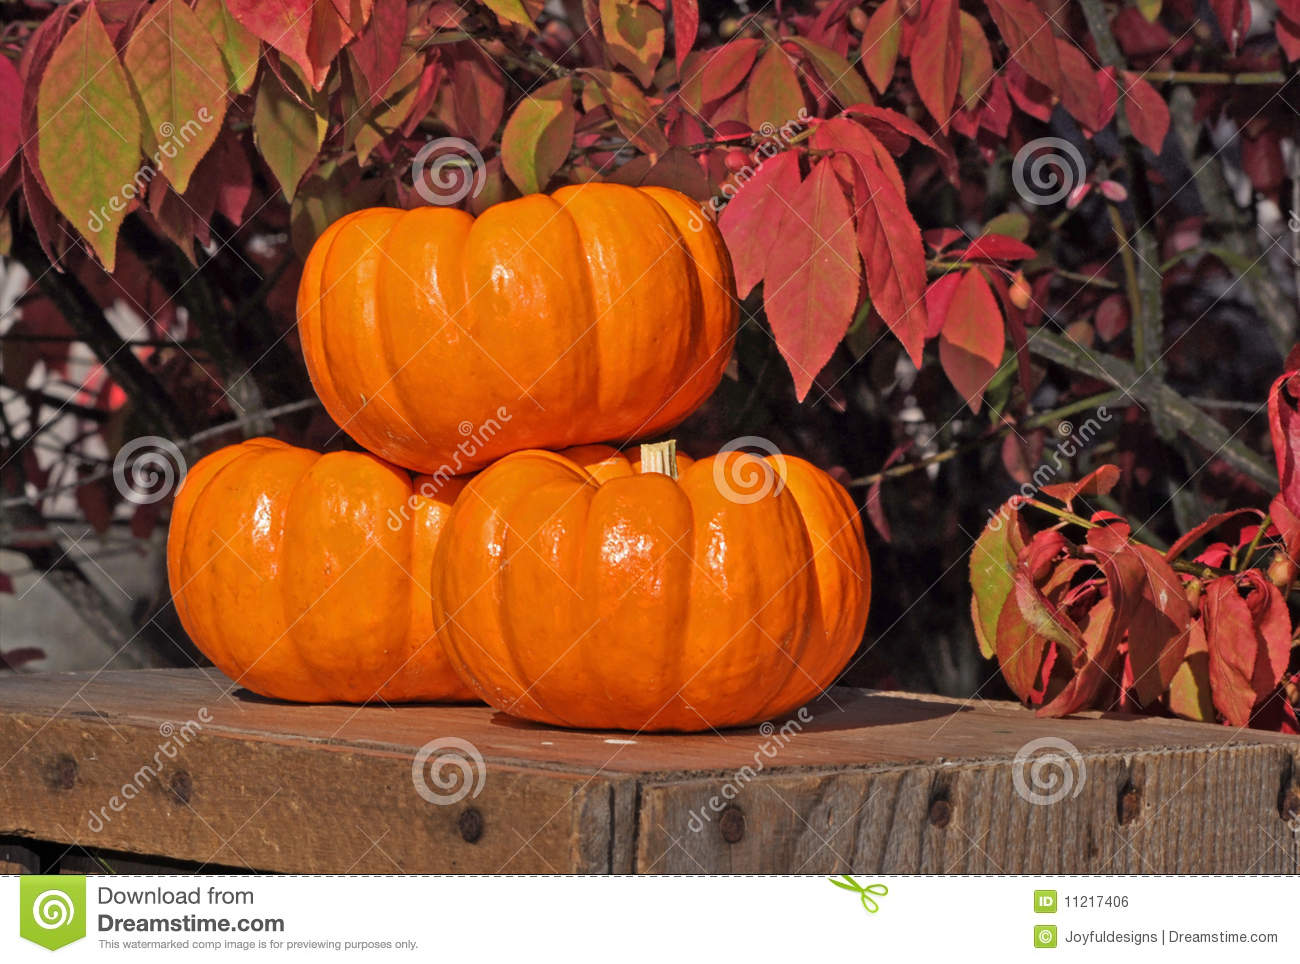 This Still Life Is Three Small Pumpkins Stacked On A Wooden Crates